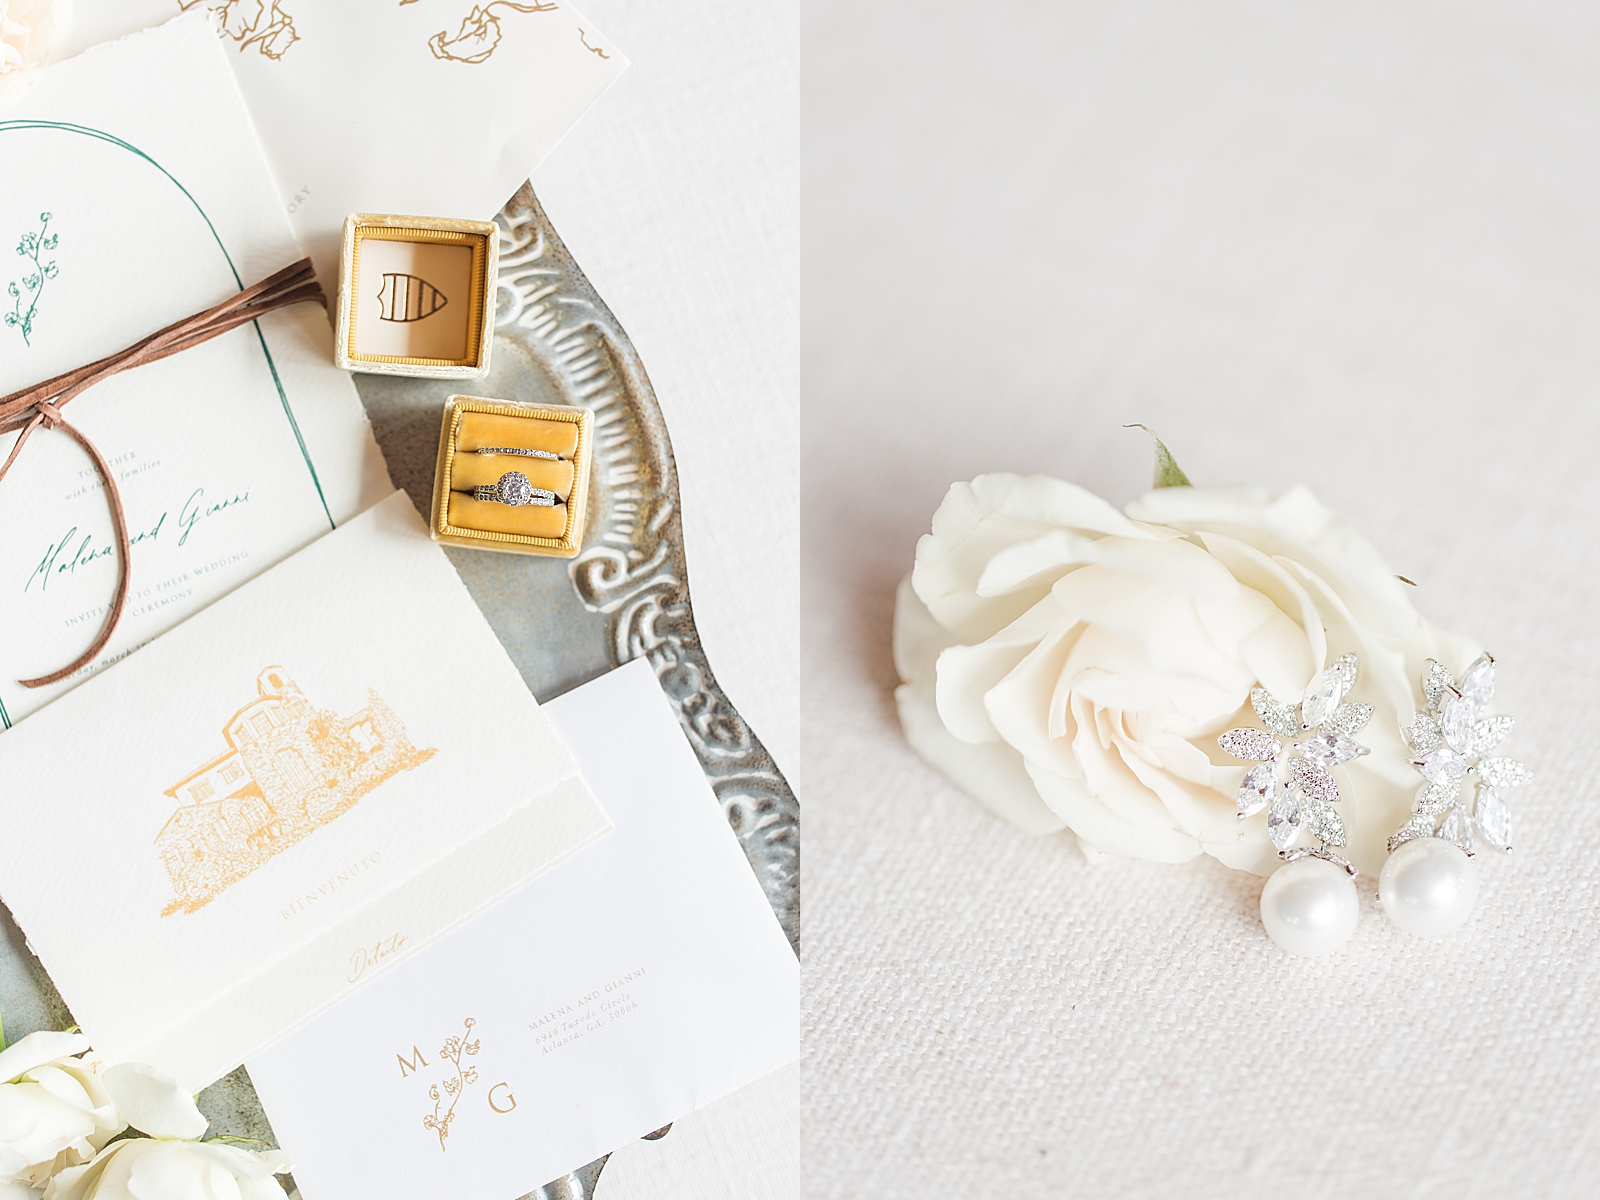 Montaluce Winery Wedding Invitation Suite on Metal Tray with Rings in yellow ring box and earrings with white rose Photos